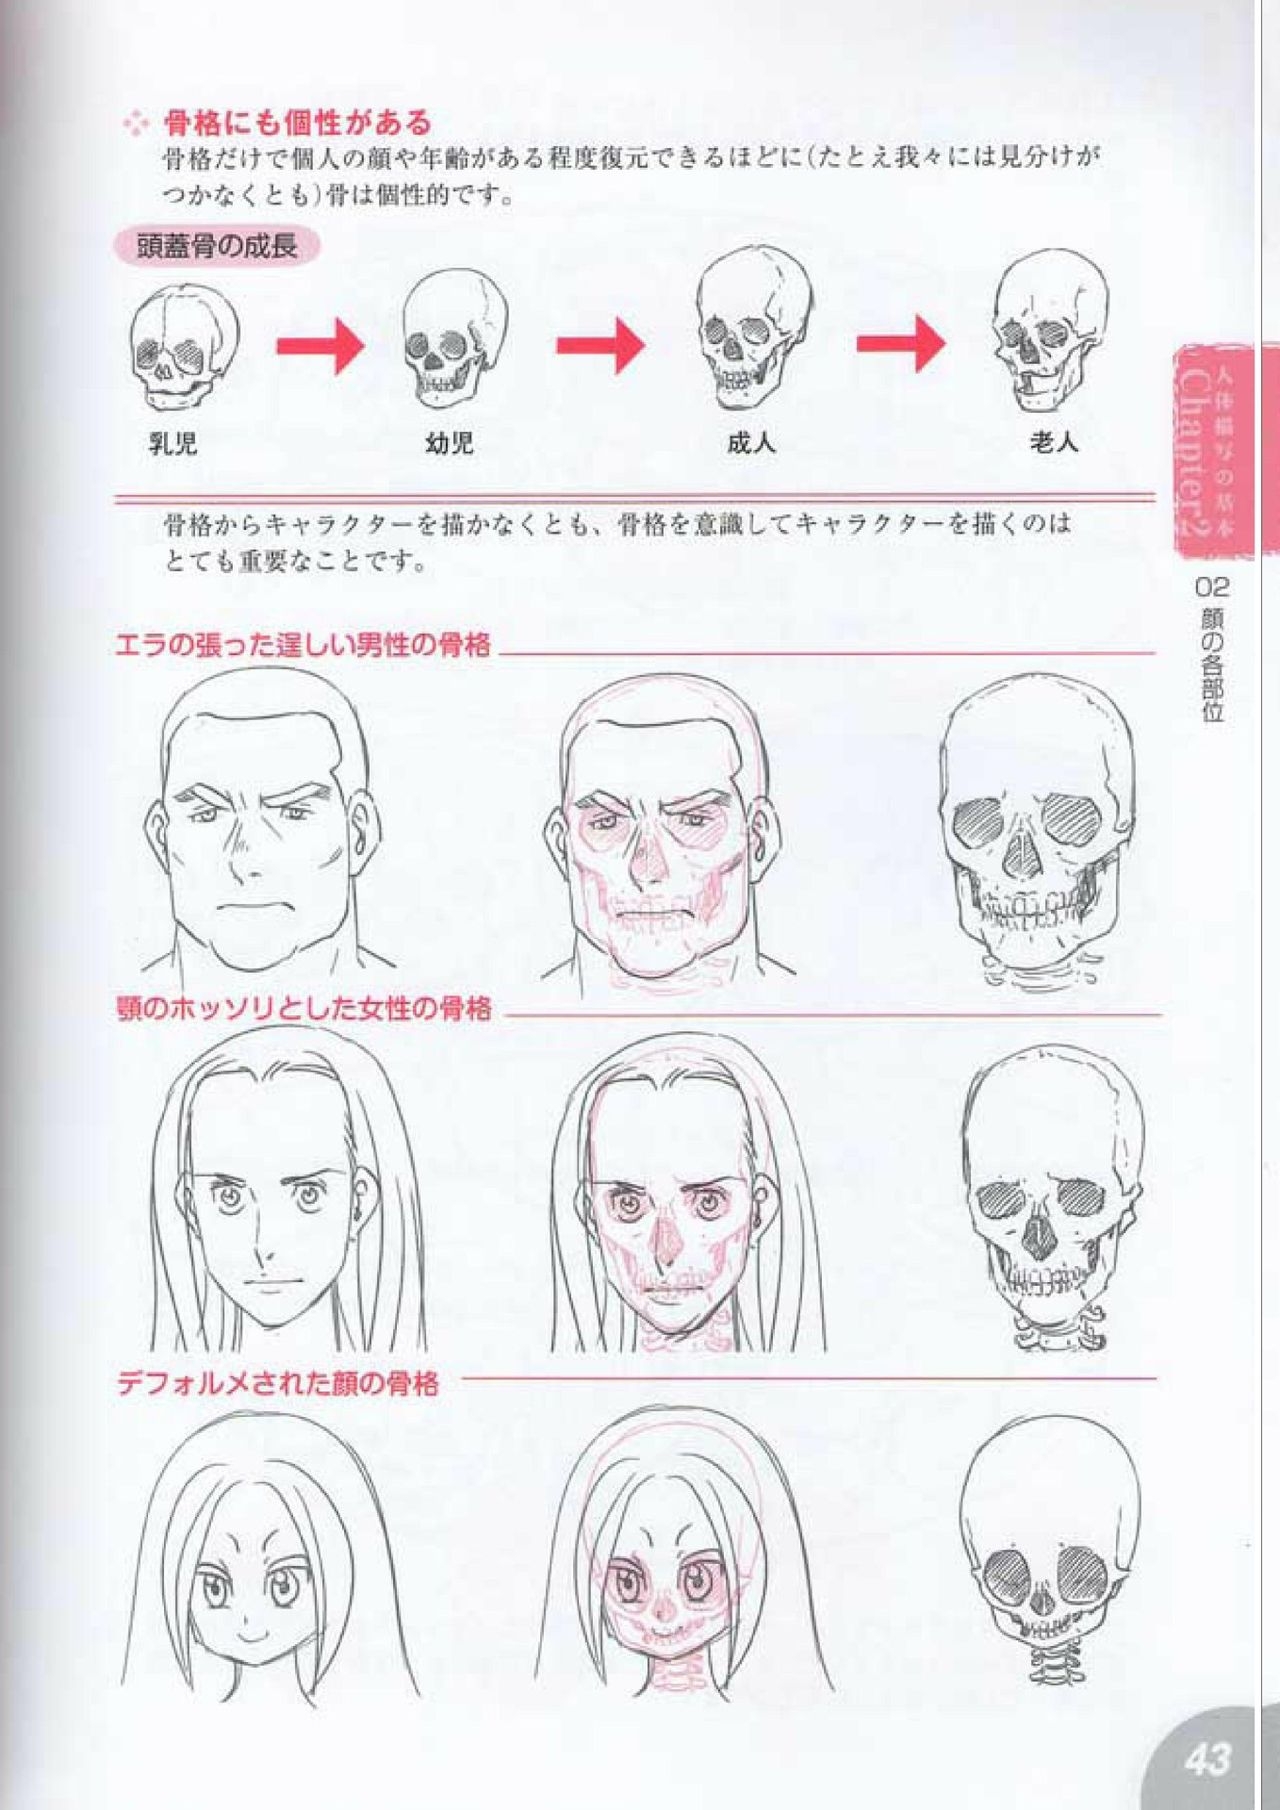 How to draw a character drawing from a human anatomical chart 41